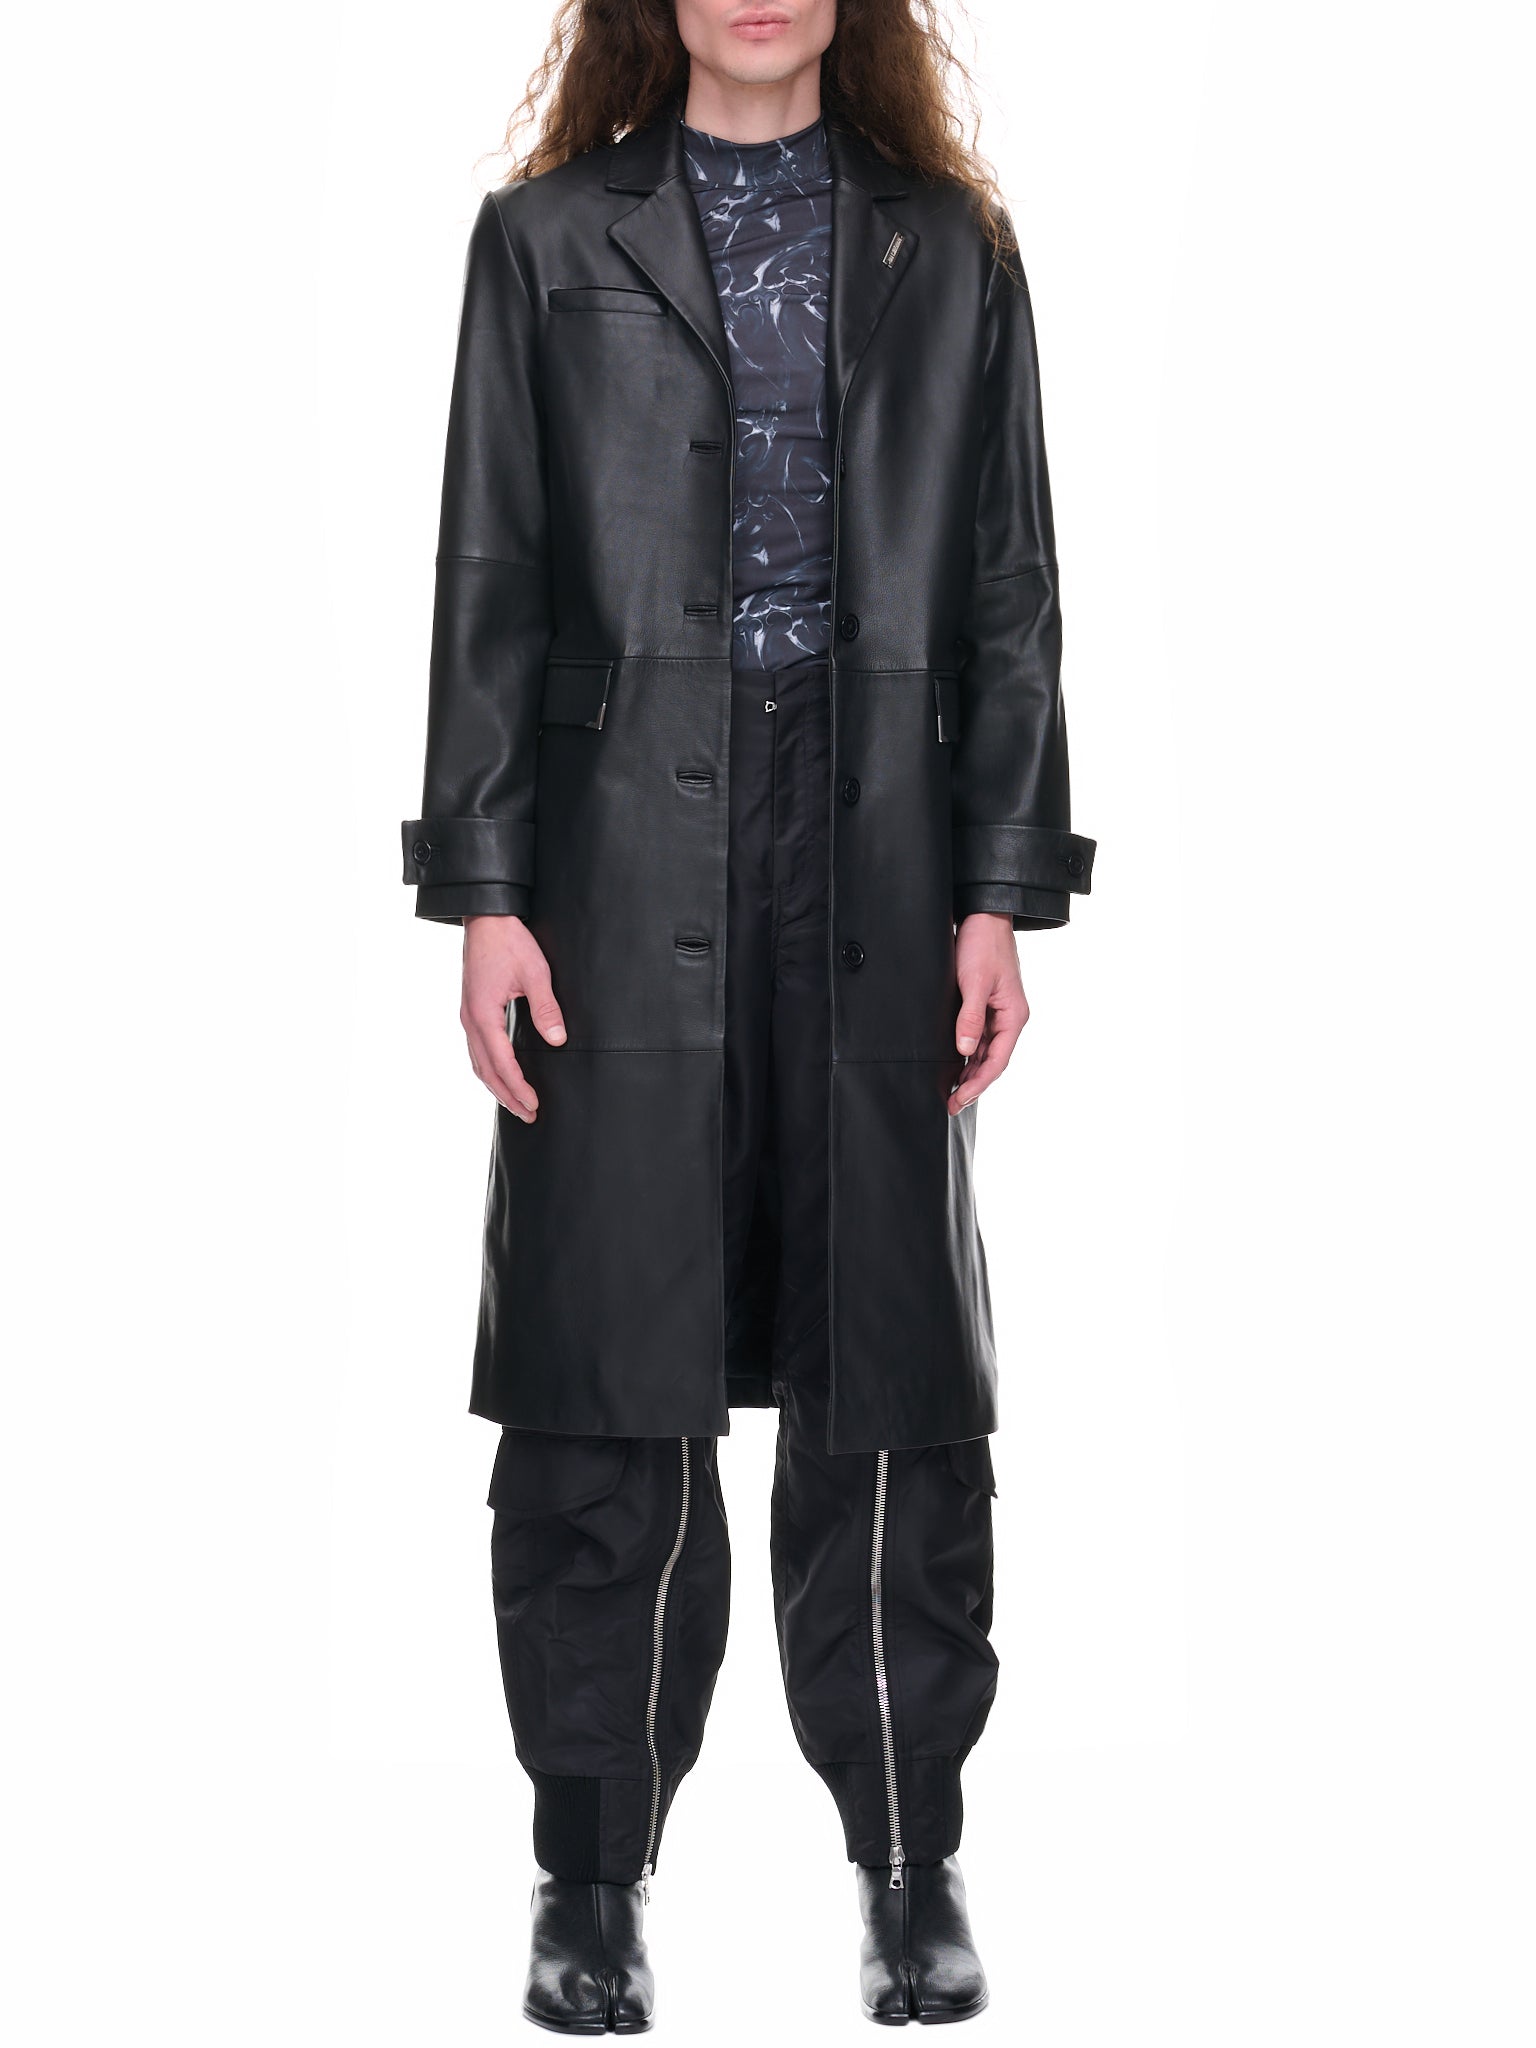 Leather Single-Breasted Coat (W-132469-BLACK)